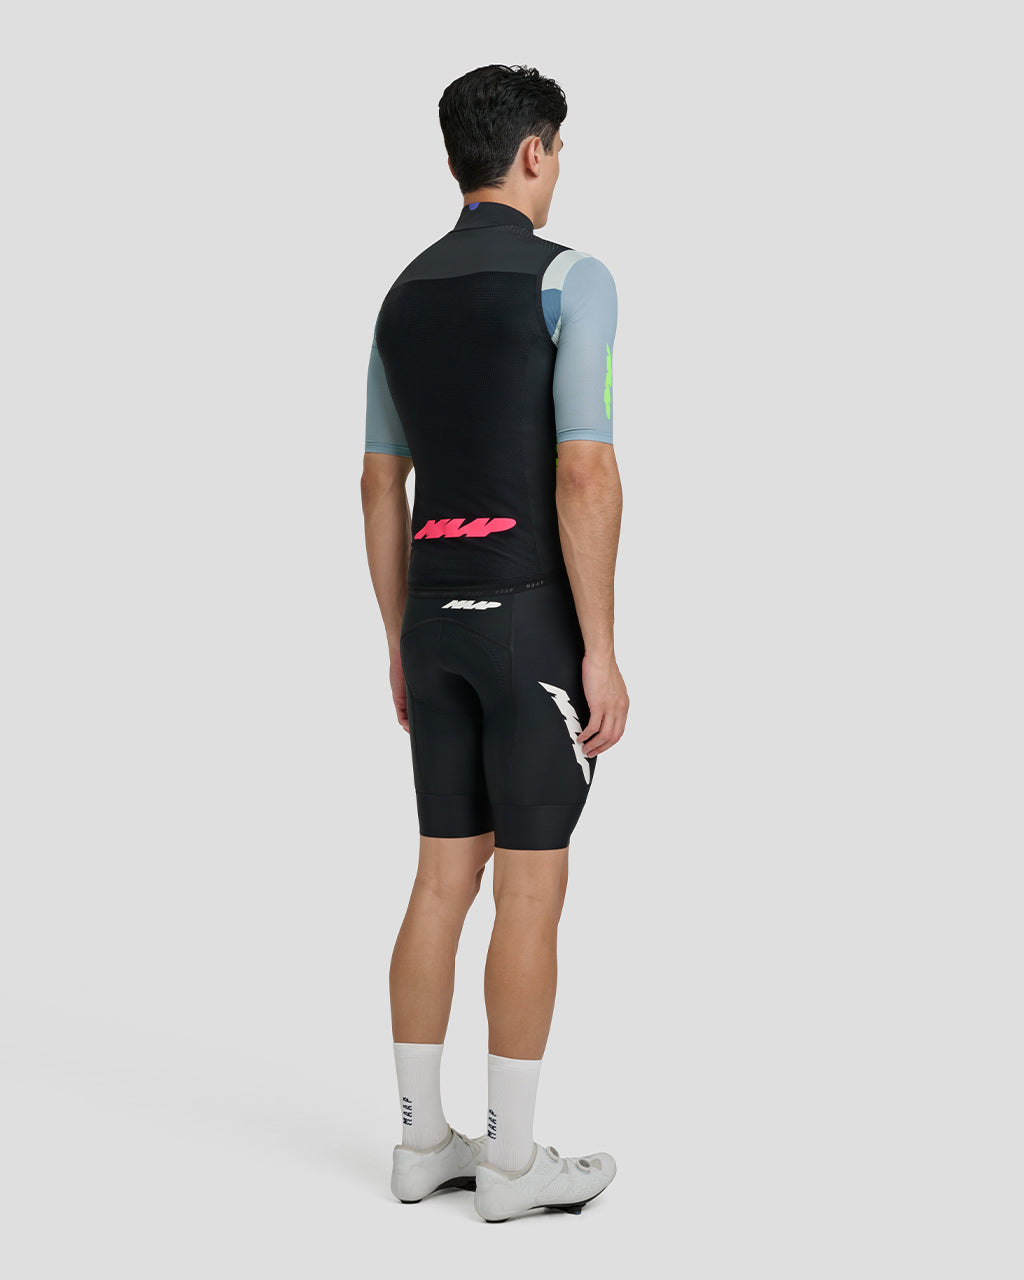 Eclipse Draft Vest - MAAP Cycling Apparel